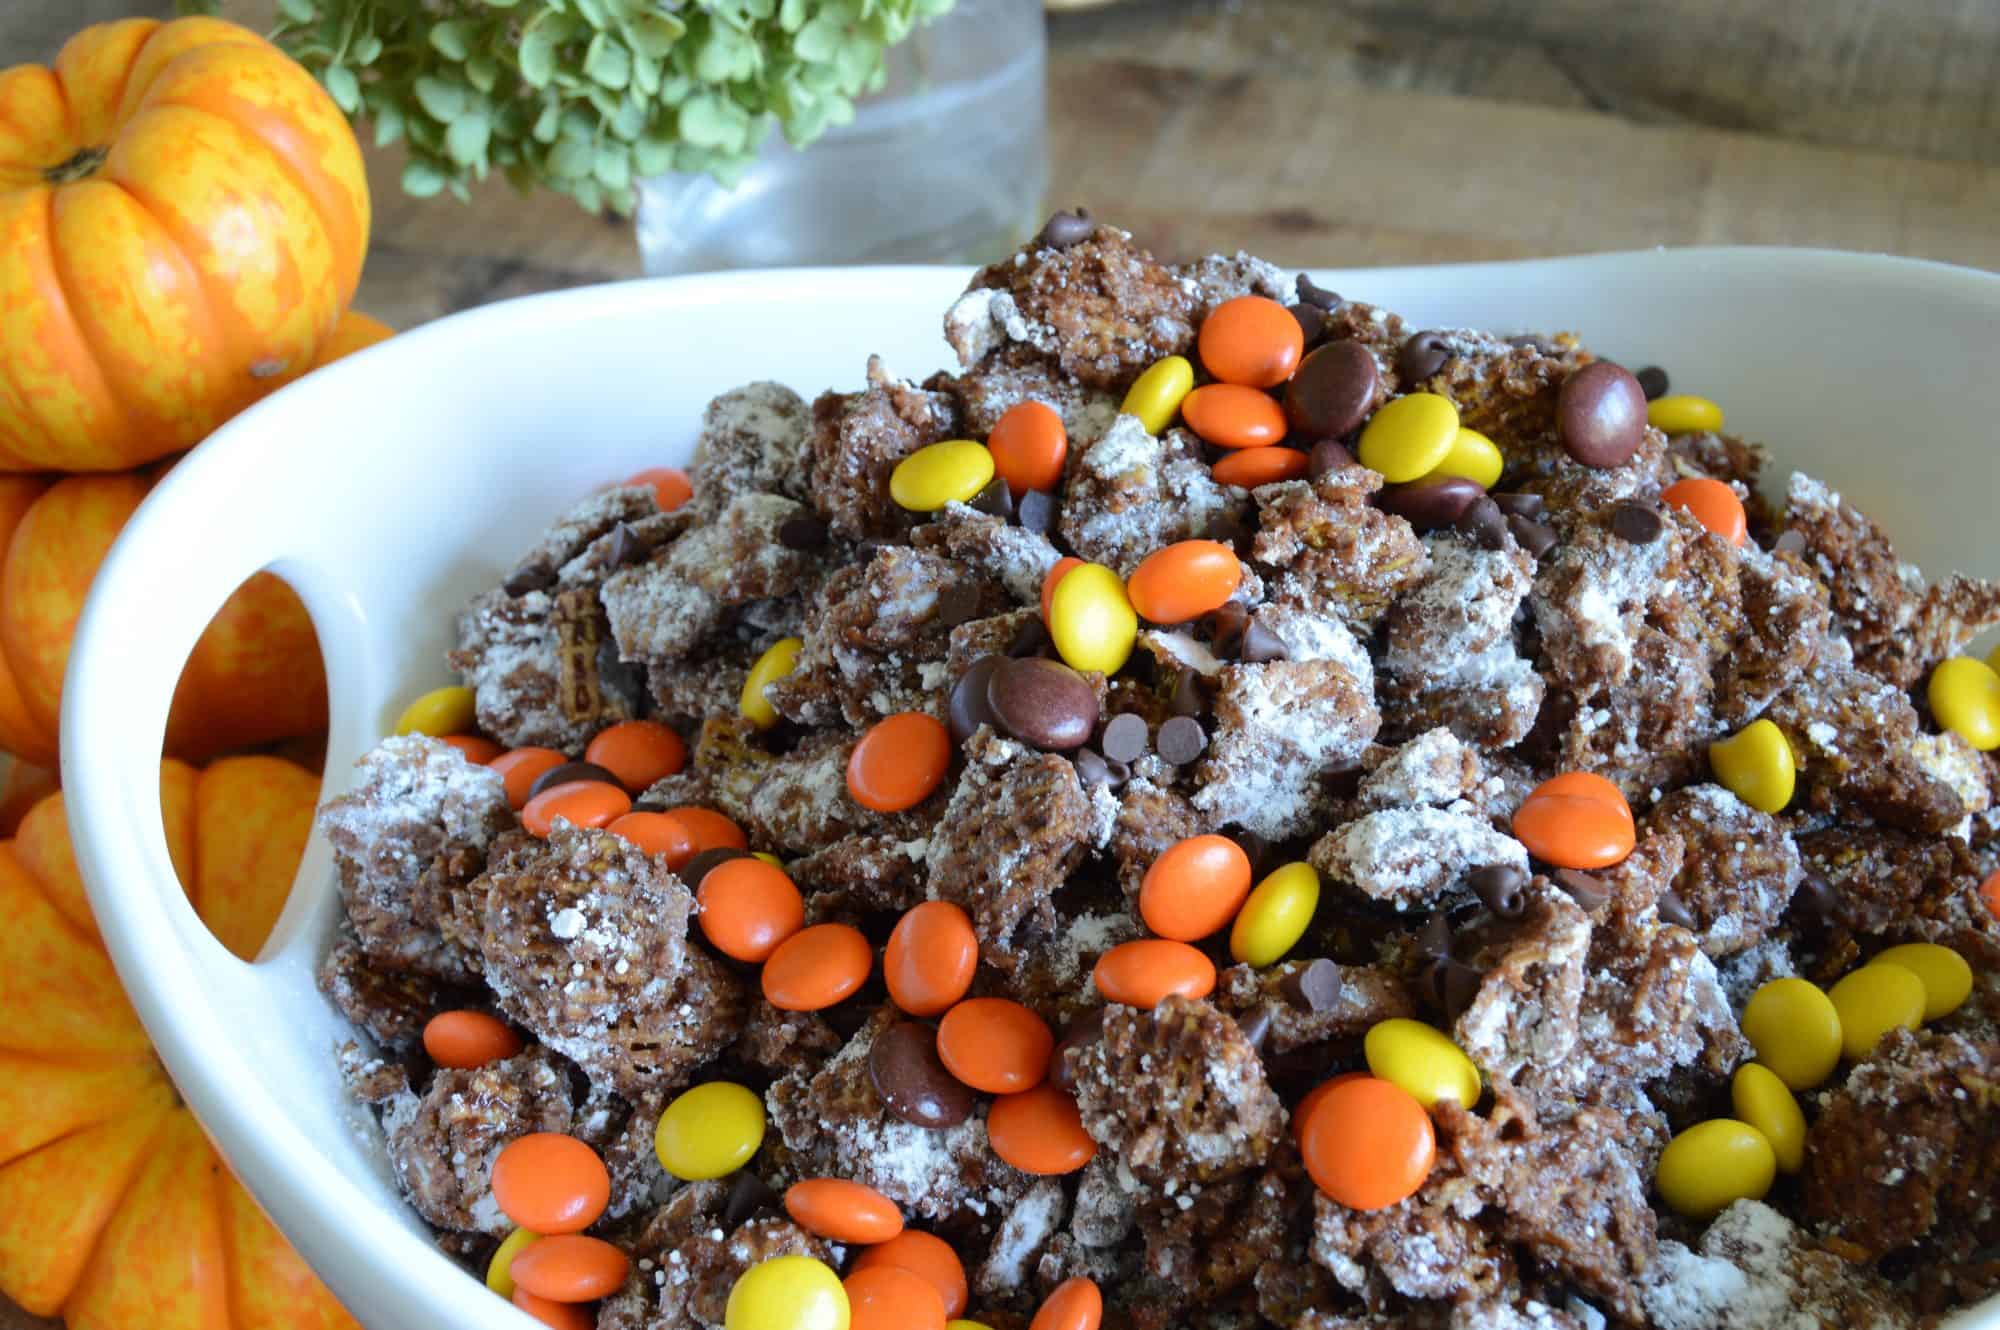 Caramel puppy show made with Jimmy's Caramel Dip topped with Reese's Pieces for a fun Halloween Recipe